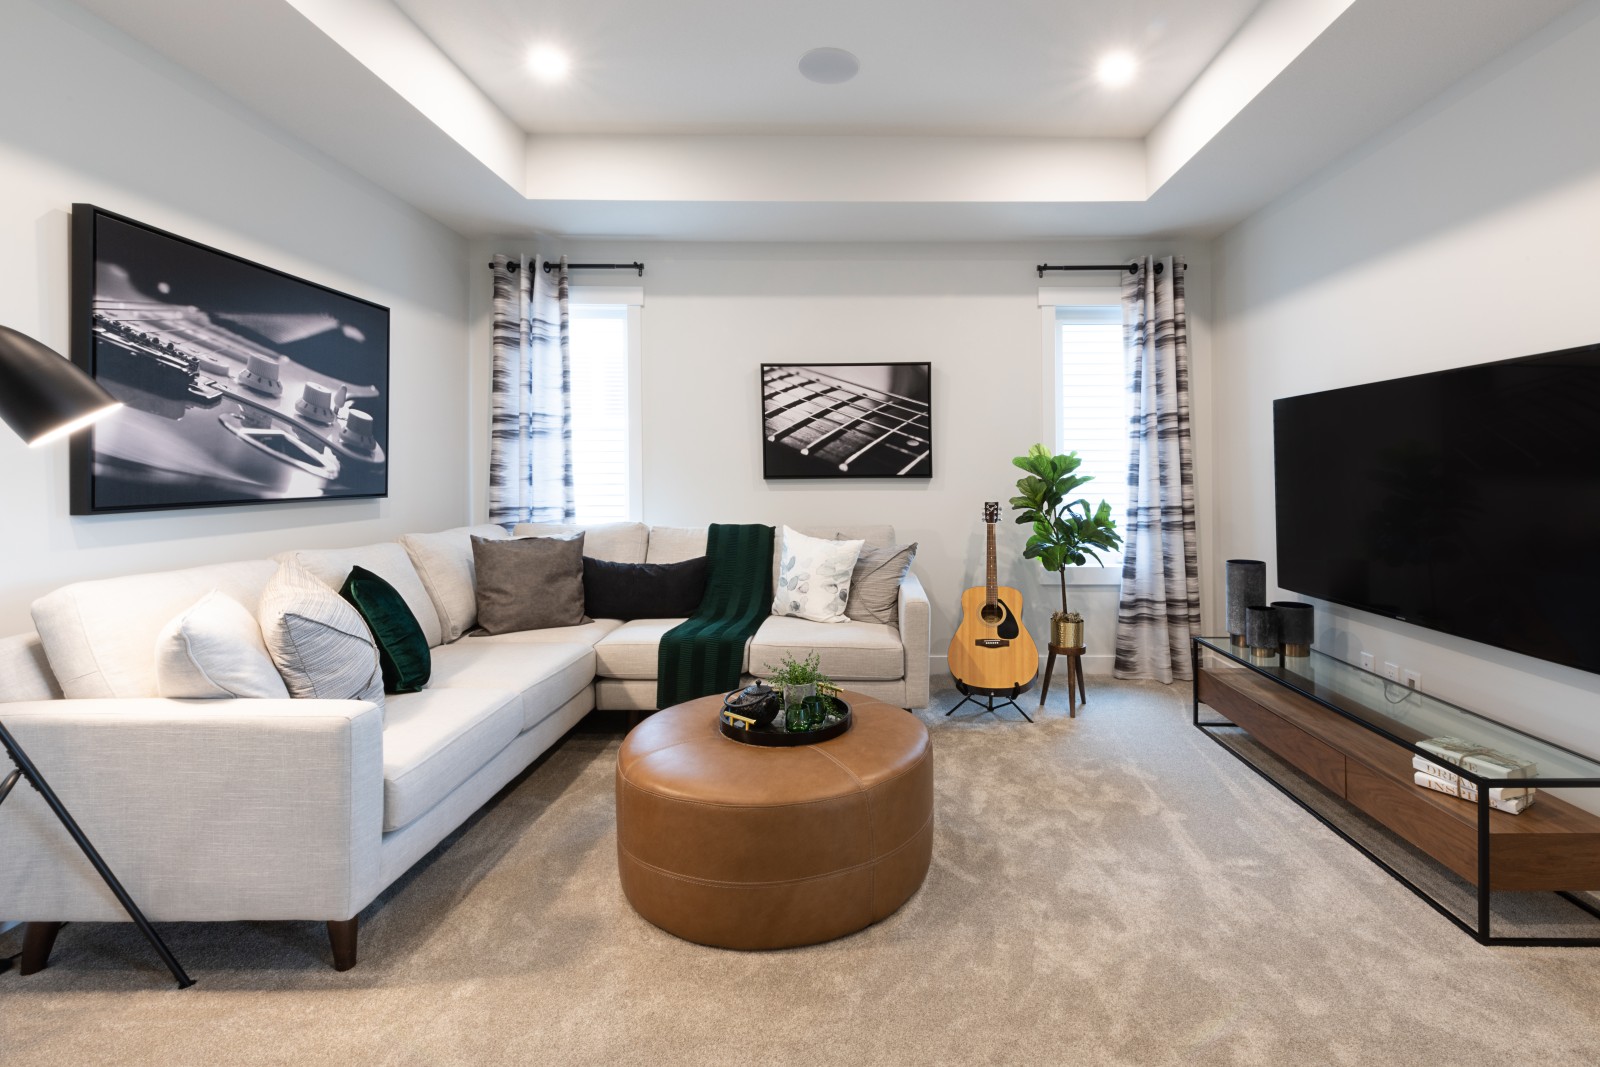 Cozy second floor bonus room with tray ceiling detail, inviting sectional couch, cognac upholstered ottoman, music inspired art work and guitar in the corner